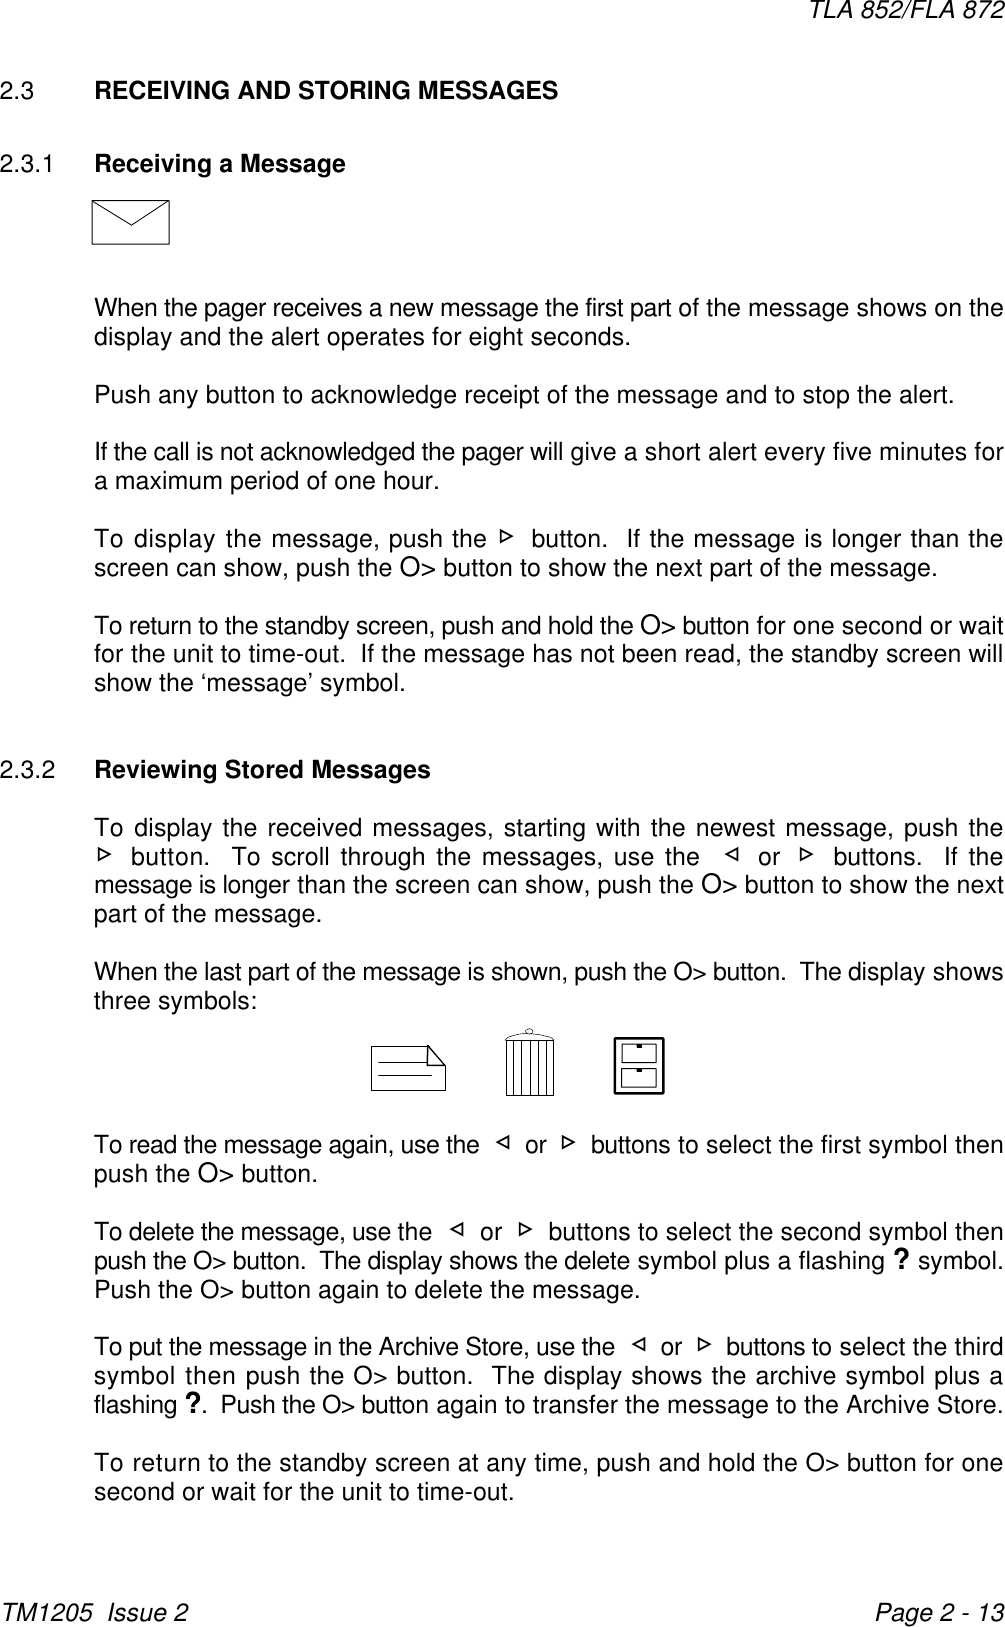 TLA 852/FLA 872TM1205  Issue 2 Page 2 - 132.3 RECEIVING AND STORING MESSAGES2.3.1 Receiving a MessageWhen the pager receives a new message the first part of the message shows on thedisplay and the alert operates for eight seconds. Push any button to acknowledge receipt of the message and to stop the alert. If the call is not acknowledged the pager will give a short alert every five minutes fora maximum period of one hour.To display the message, push the - button.  If the message is longer than thescreen can show, push the O&gt; button to show the next part of the message.To return to the standby screen, push and hold the O&gt; button for one second or waitfor the unit to time-out.  If the message has not been read, the standby screen willshow the ‘message’ symbol.2.3.2 Reviewing Stored MessagesTo display the received messages, starting with the newest message, push the- button.  To scroll through the messages, use the  ¬ or - buttons.  If themessage is longer than the screen can show, push the O&gt; button to show the nextpart of the message.When the last part of the message is shown, push the O&gt; button.  The display showsthree symbols:To read the message again, use the  ¬ or - buttons to select the first symbol thenpush the O&gt; button.To delete the message, use the  ¬ or - buttons to select the second symbol thenpush the O&gt; button.  The display shows the delete symbol plus a flashing ? symbol.Push the O&gt; button again to delete the message.To put the message in the Archive Store, use the  ¬ or - buttons to select the thirdsymbol then push the O&gt; button.  The display shows the archive symbol plus aflashing ?.  Push the O&gt; button again to transfer the message to the Archive Store.To return to the standby screen at any time, push and hold the O&gt; button for onesecond or wait for the unit to time-out.